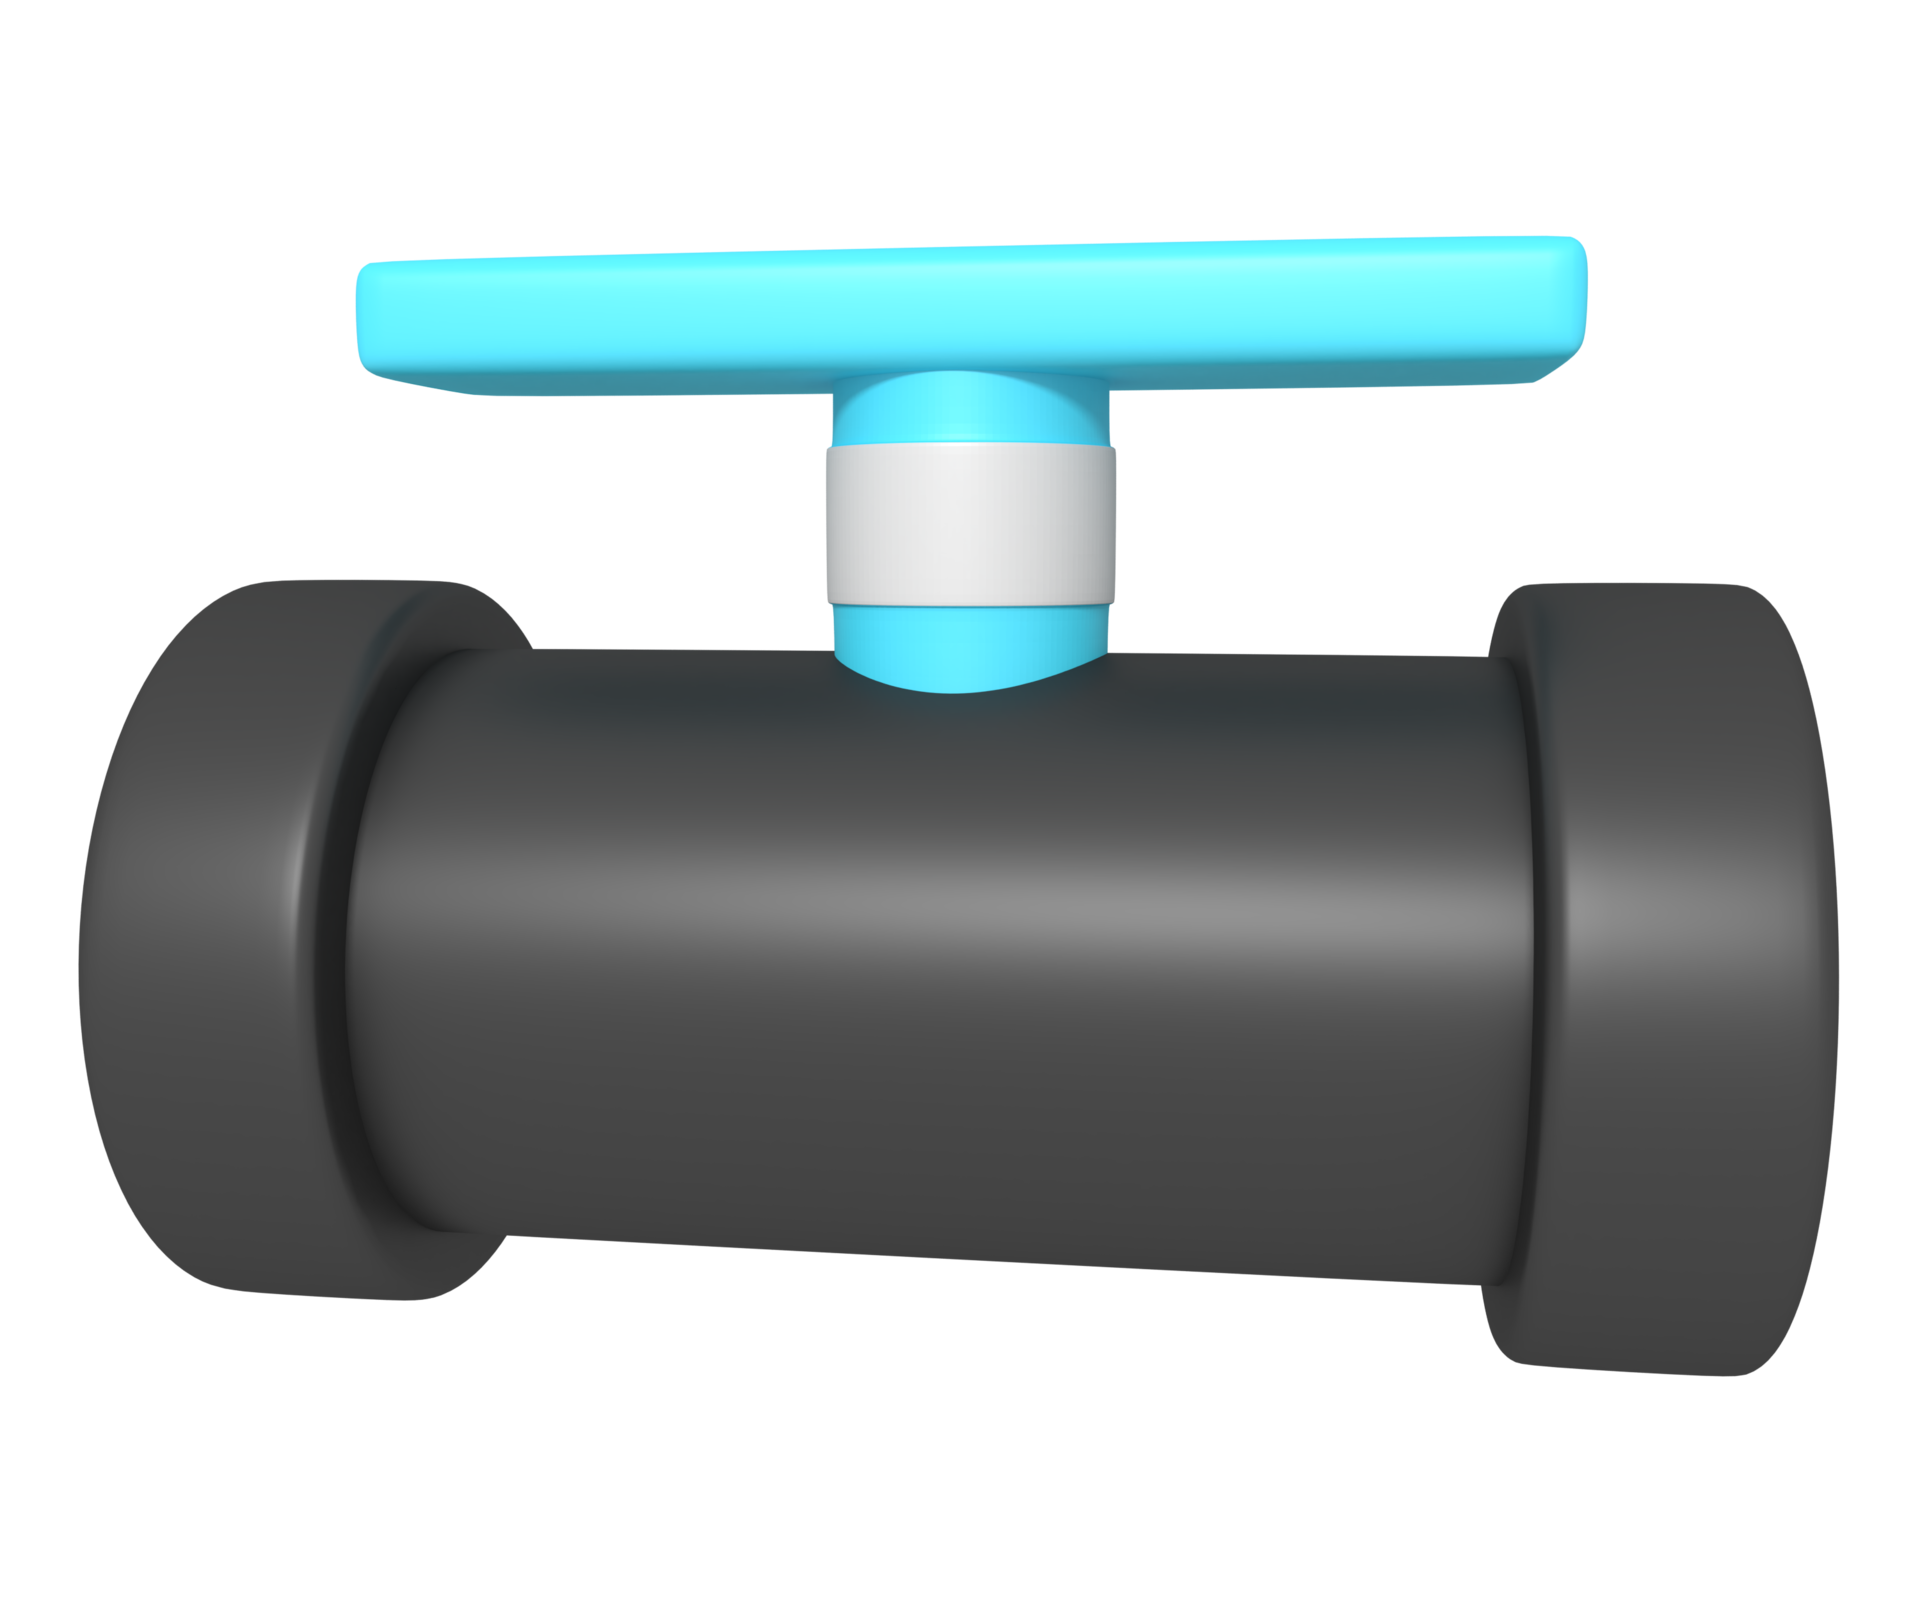 3d render of pipe with valve